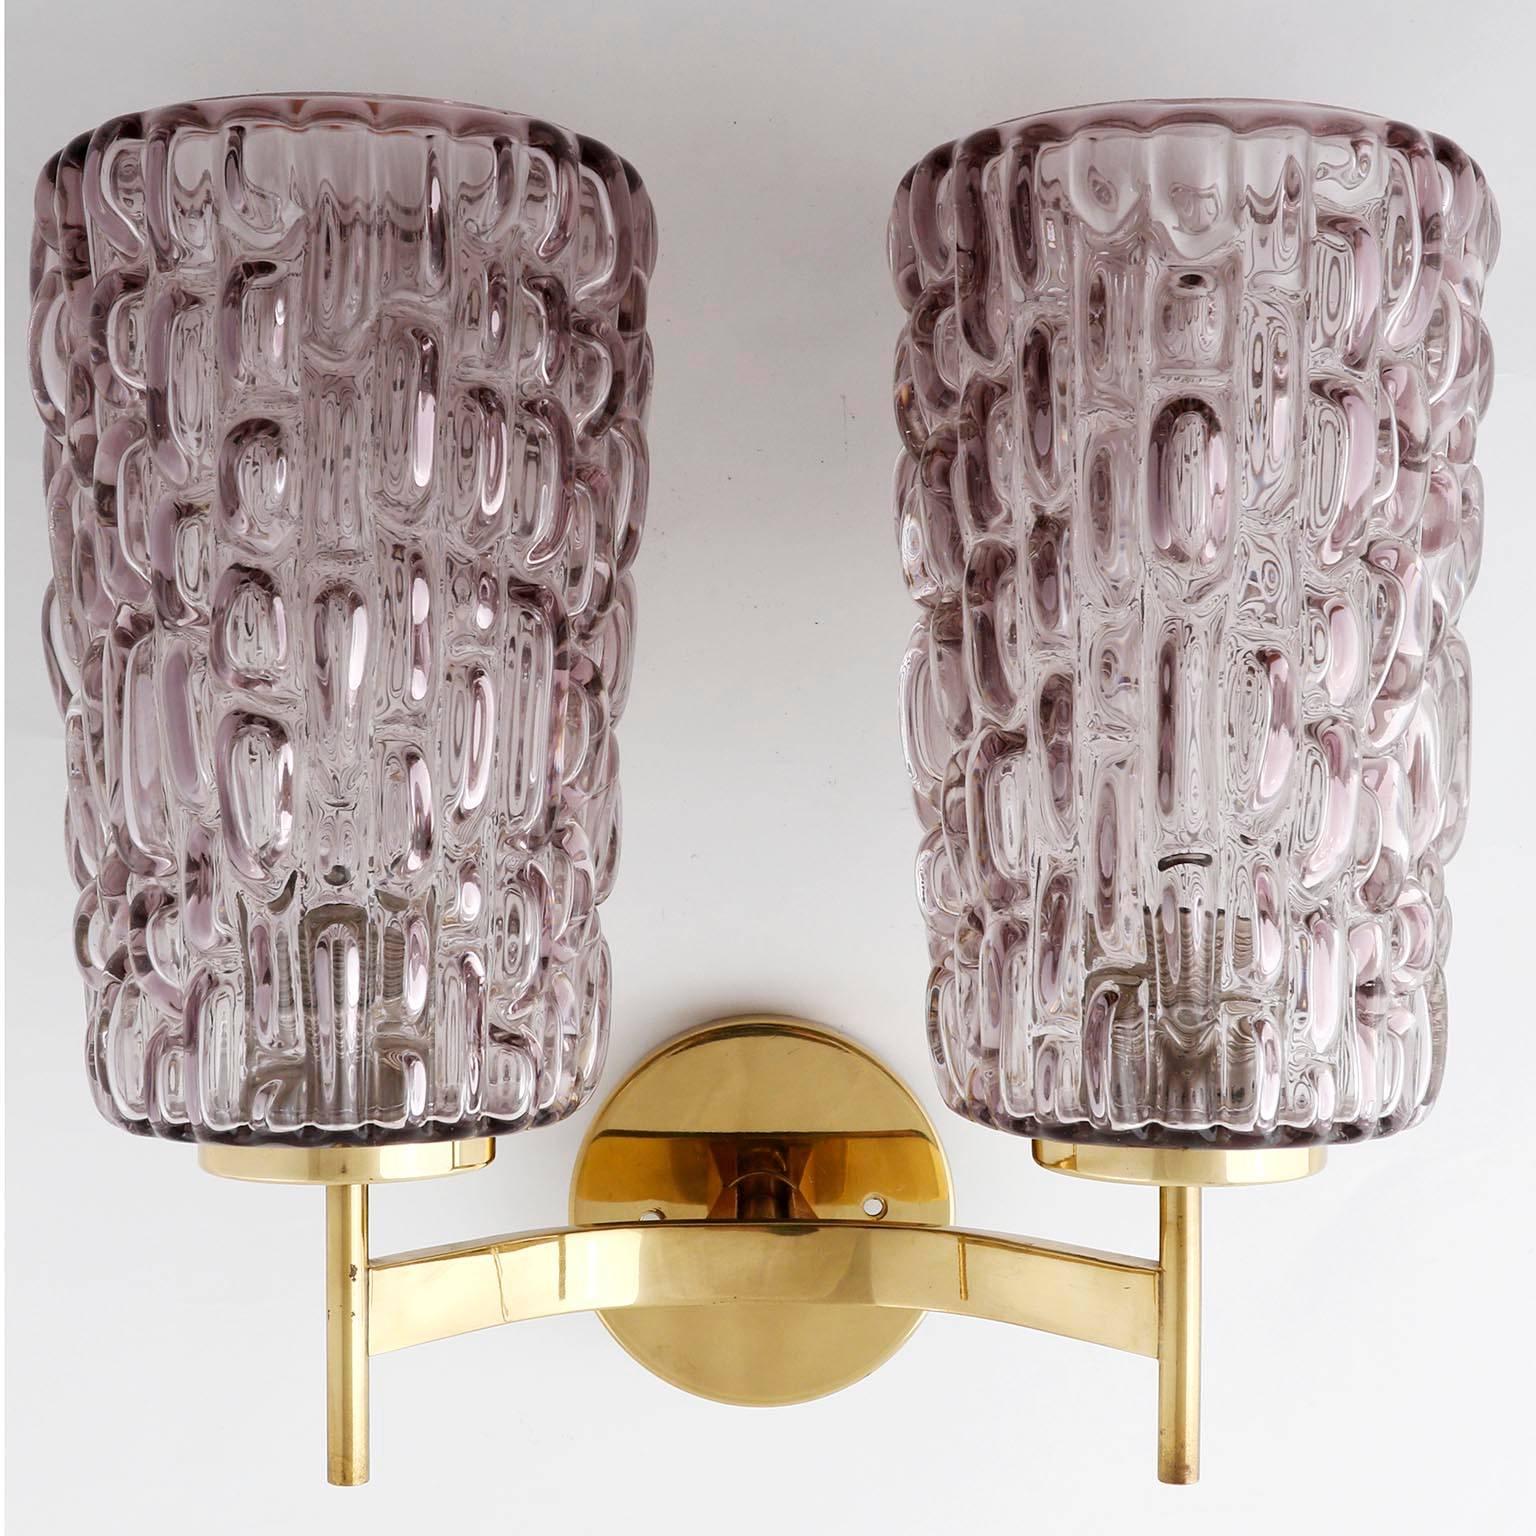 A pair of glass and brass sconces by Rupert Nikoll, Austria, manufactured in midcentury, circa 1950 (late 1950s or early 1960s).
Each sconce is made of a brass frame with a small wood cap at the bottom and two textured glass lamp shades in a rose /